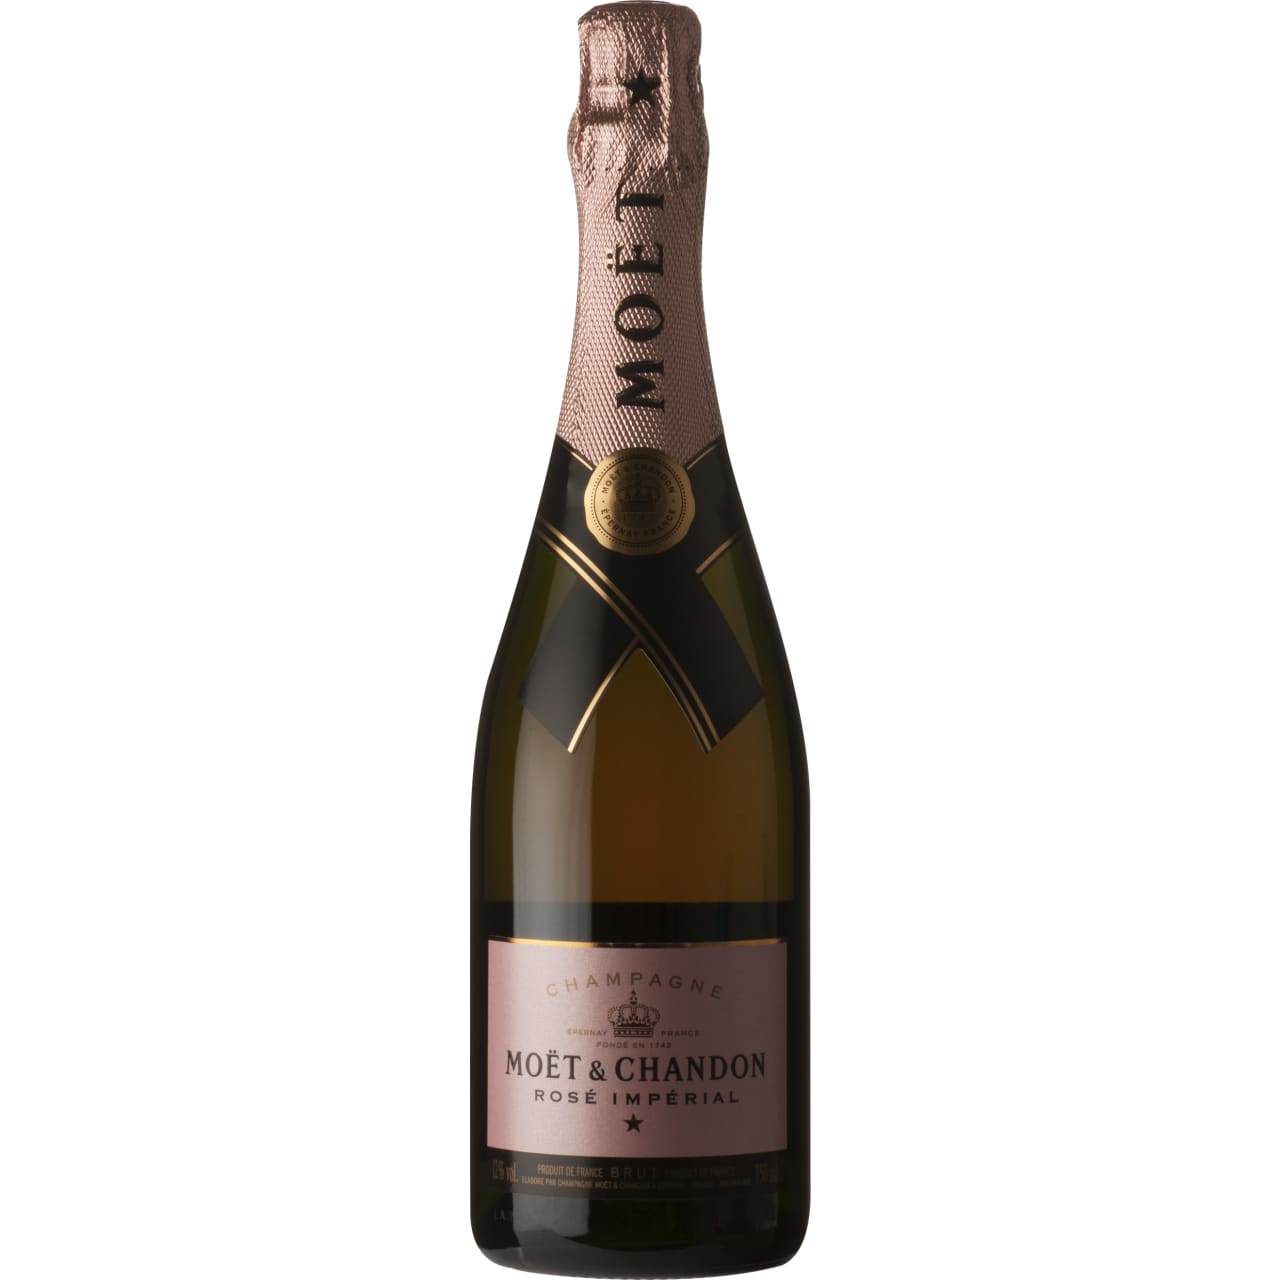 Moët & Chandon Brut Imperial Rose NV Champagne is both spontaneous and balanced, emphasising fruity liveliness. It is zestful, with great suppleness.